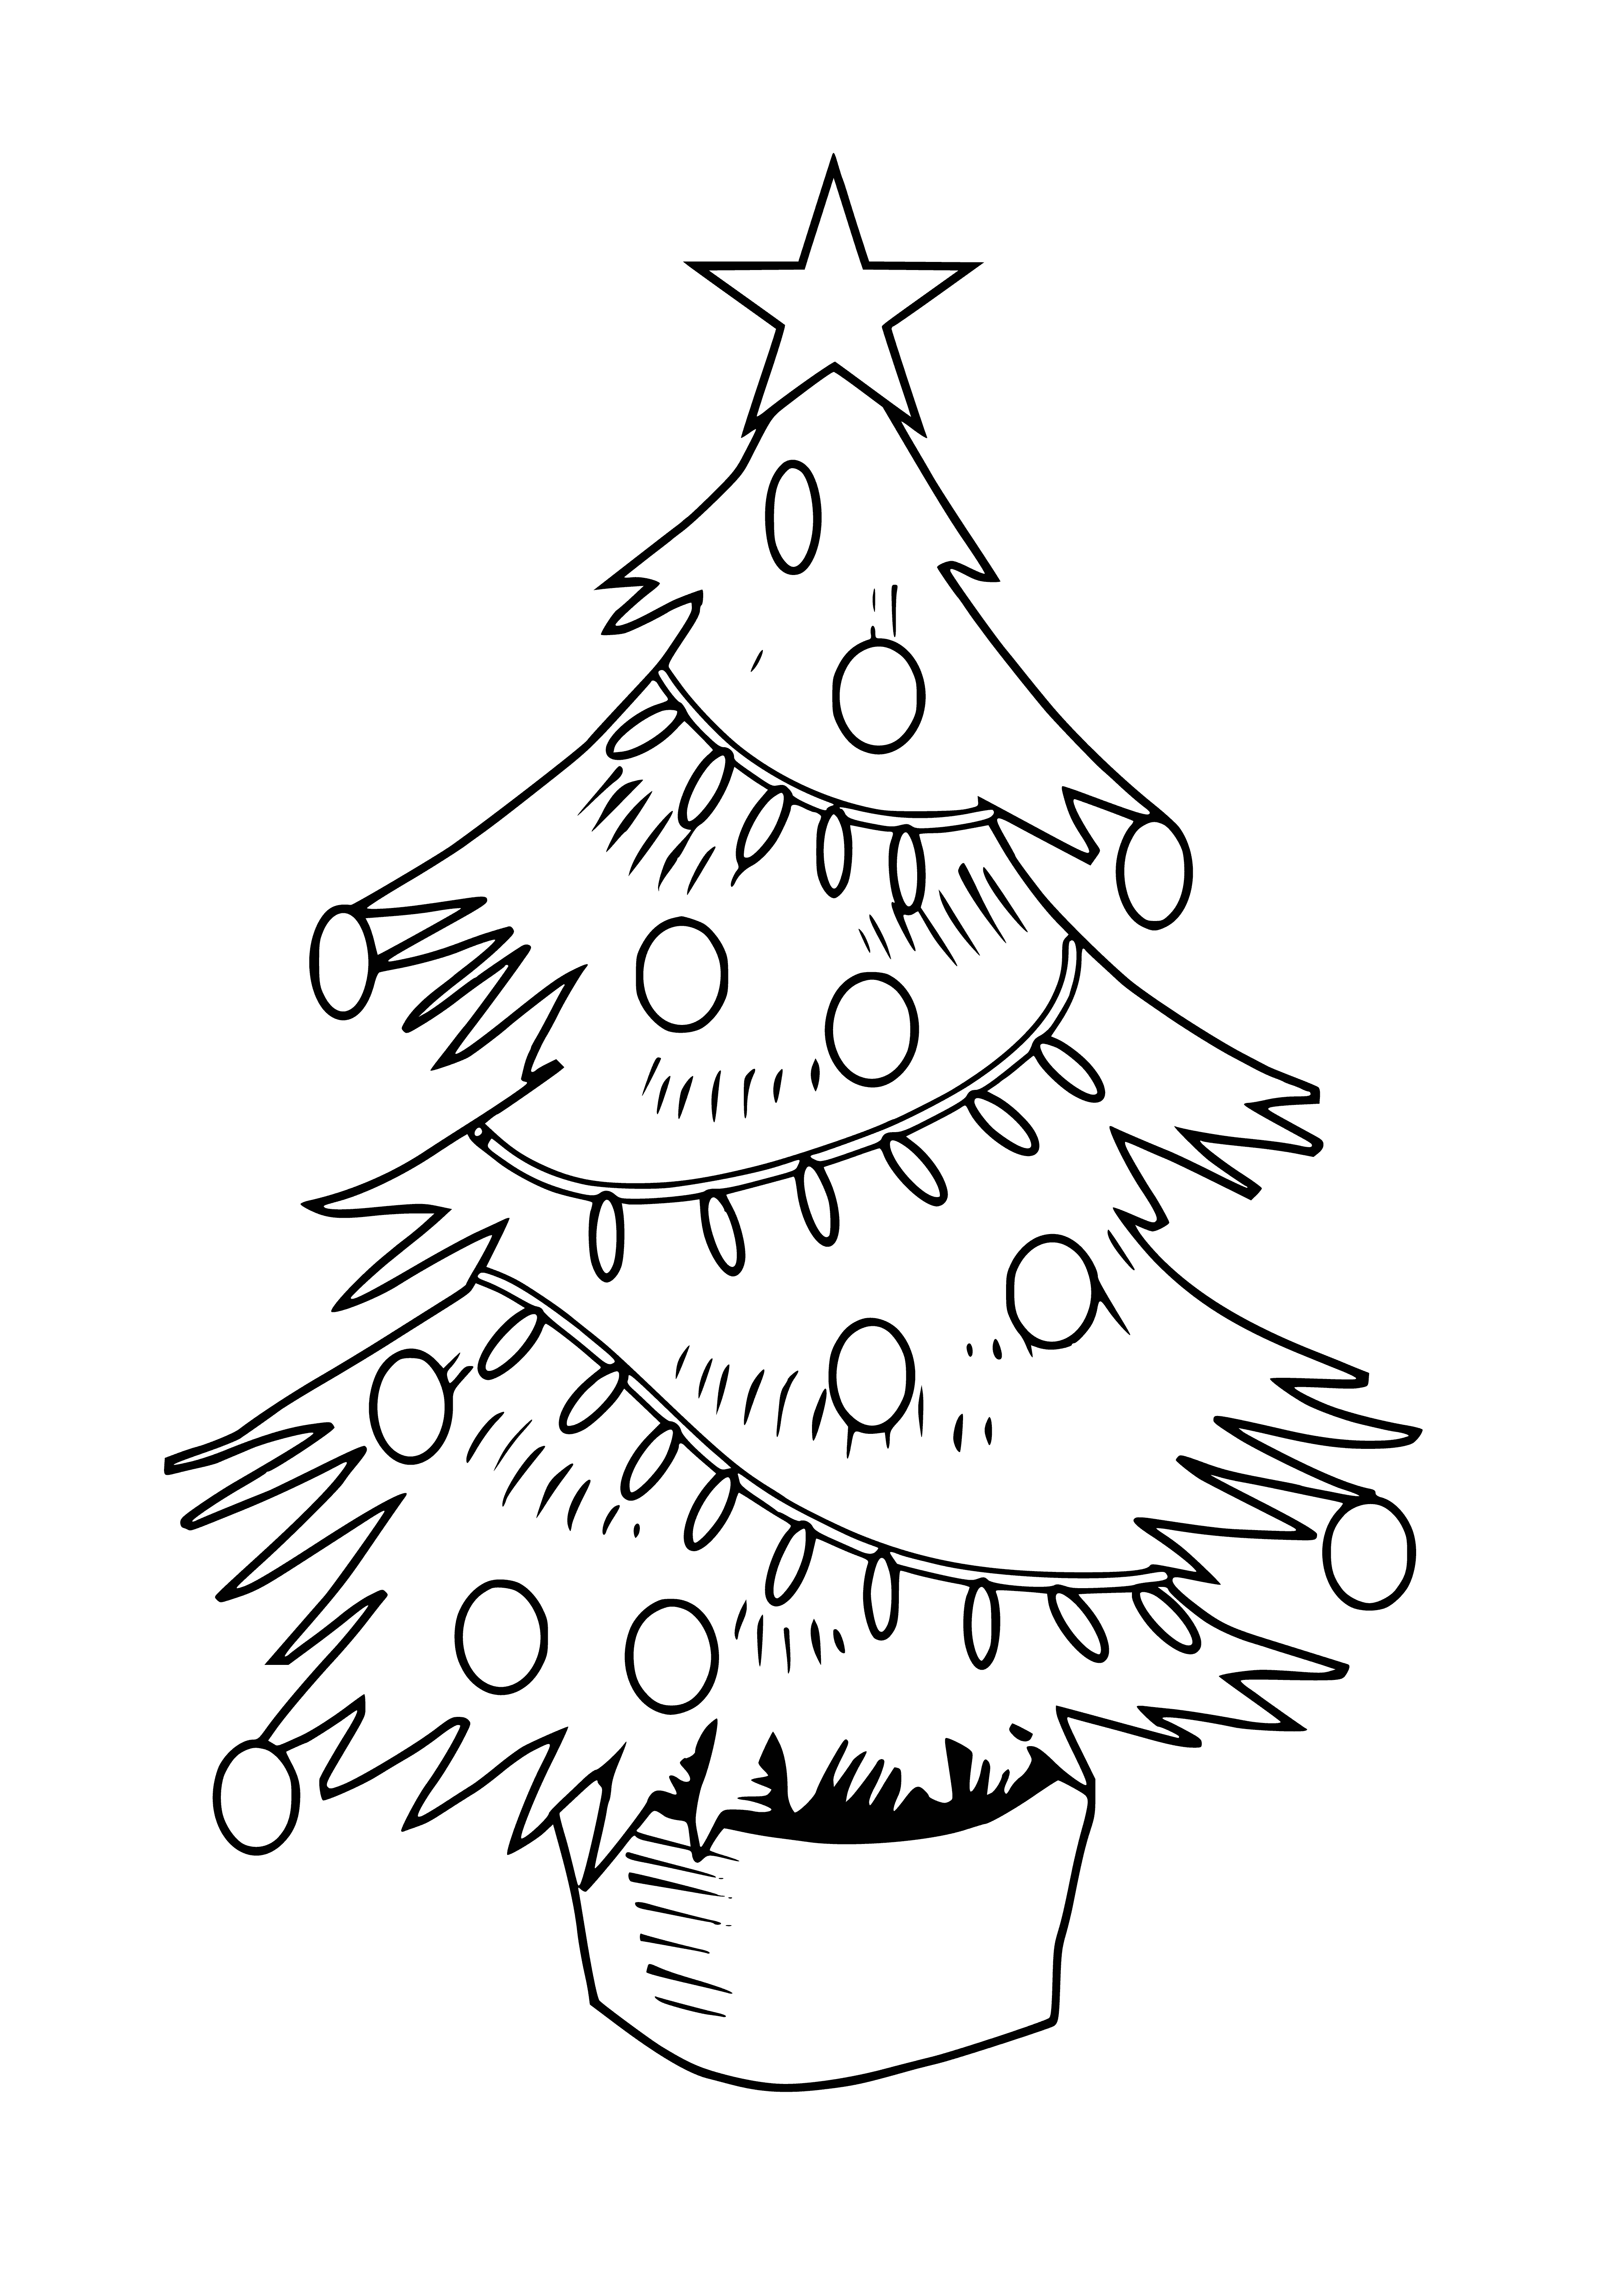 coloring page: Christmas trees decorated to celebrate the holiday, originating in medieval Germany and now an integral part of the season worldwide.